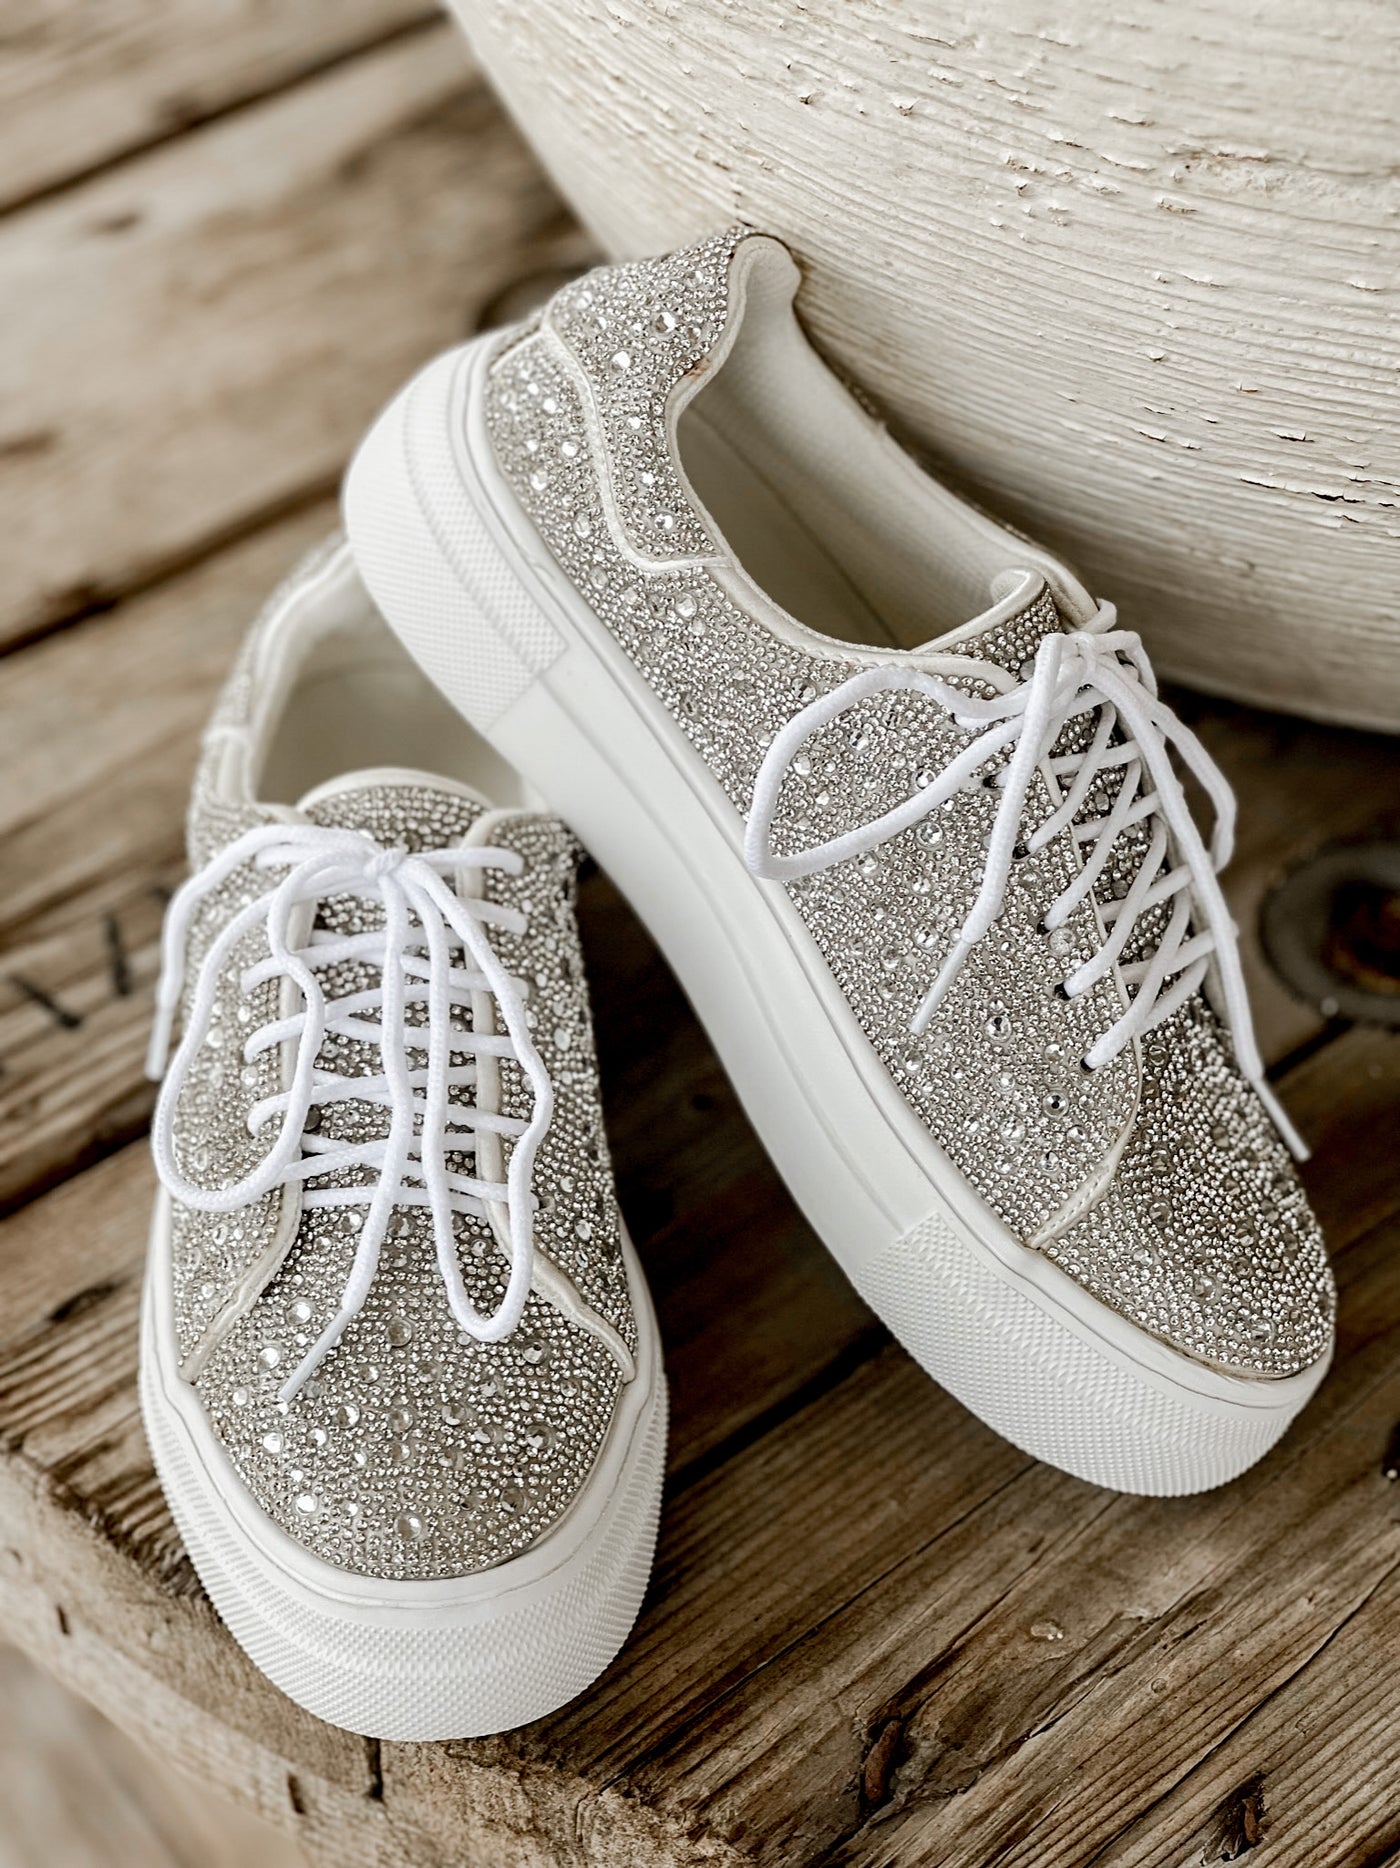 Corky’s Bedazzle Clear Rhinestone Sneakers